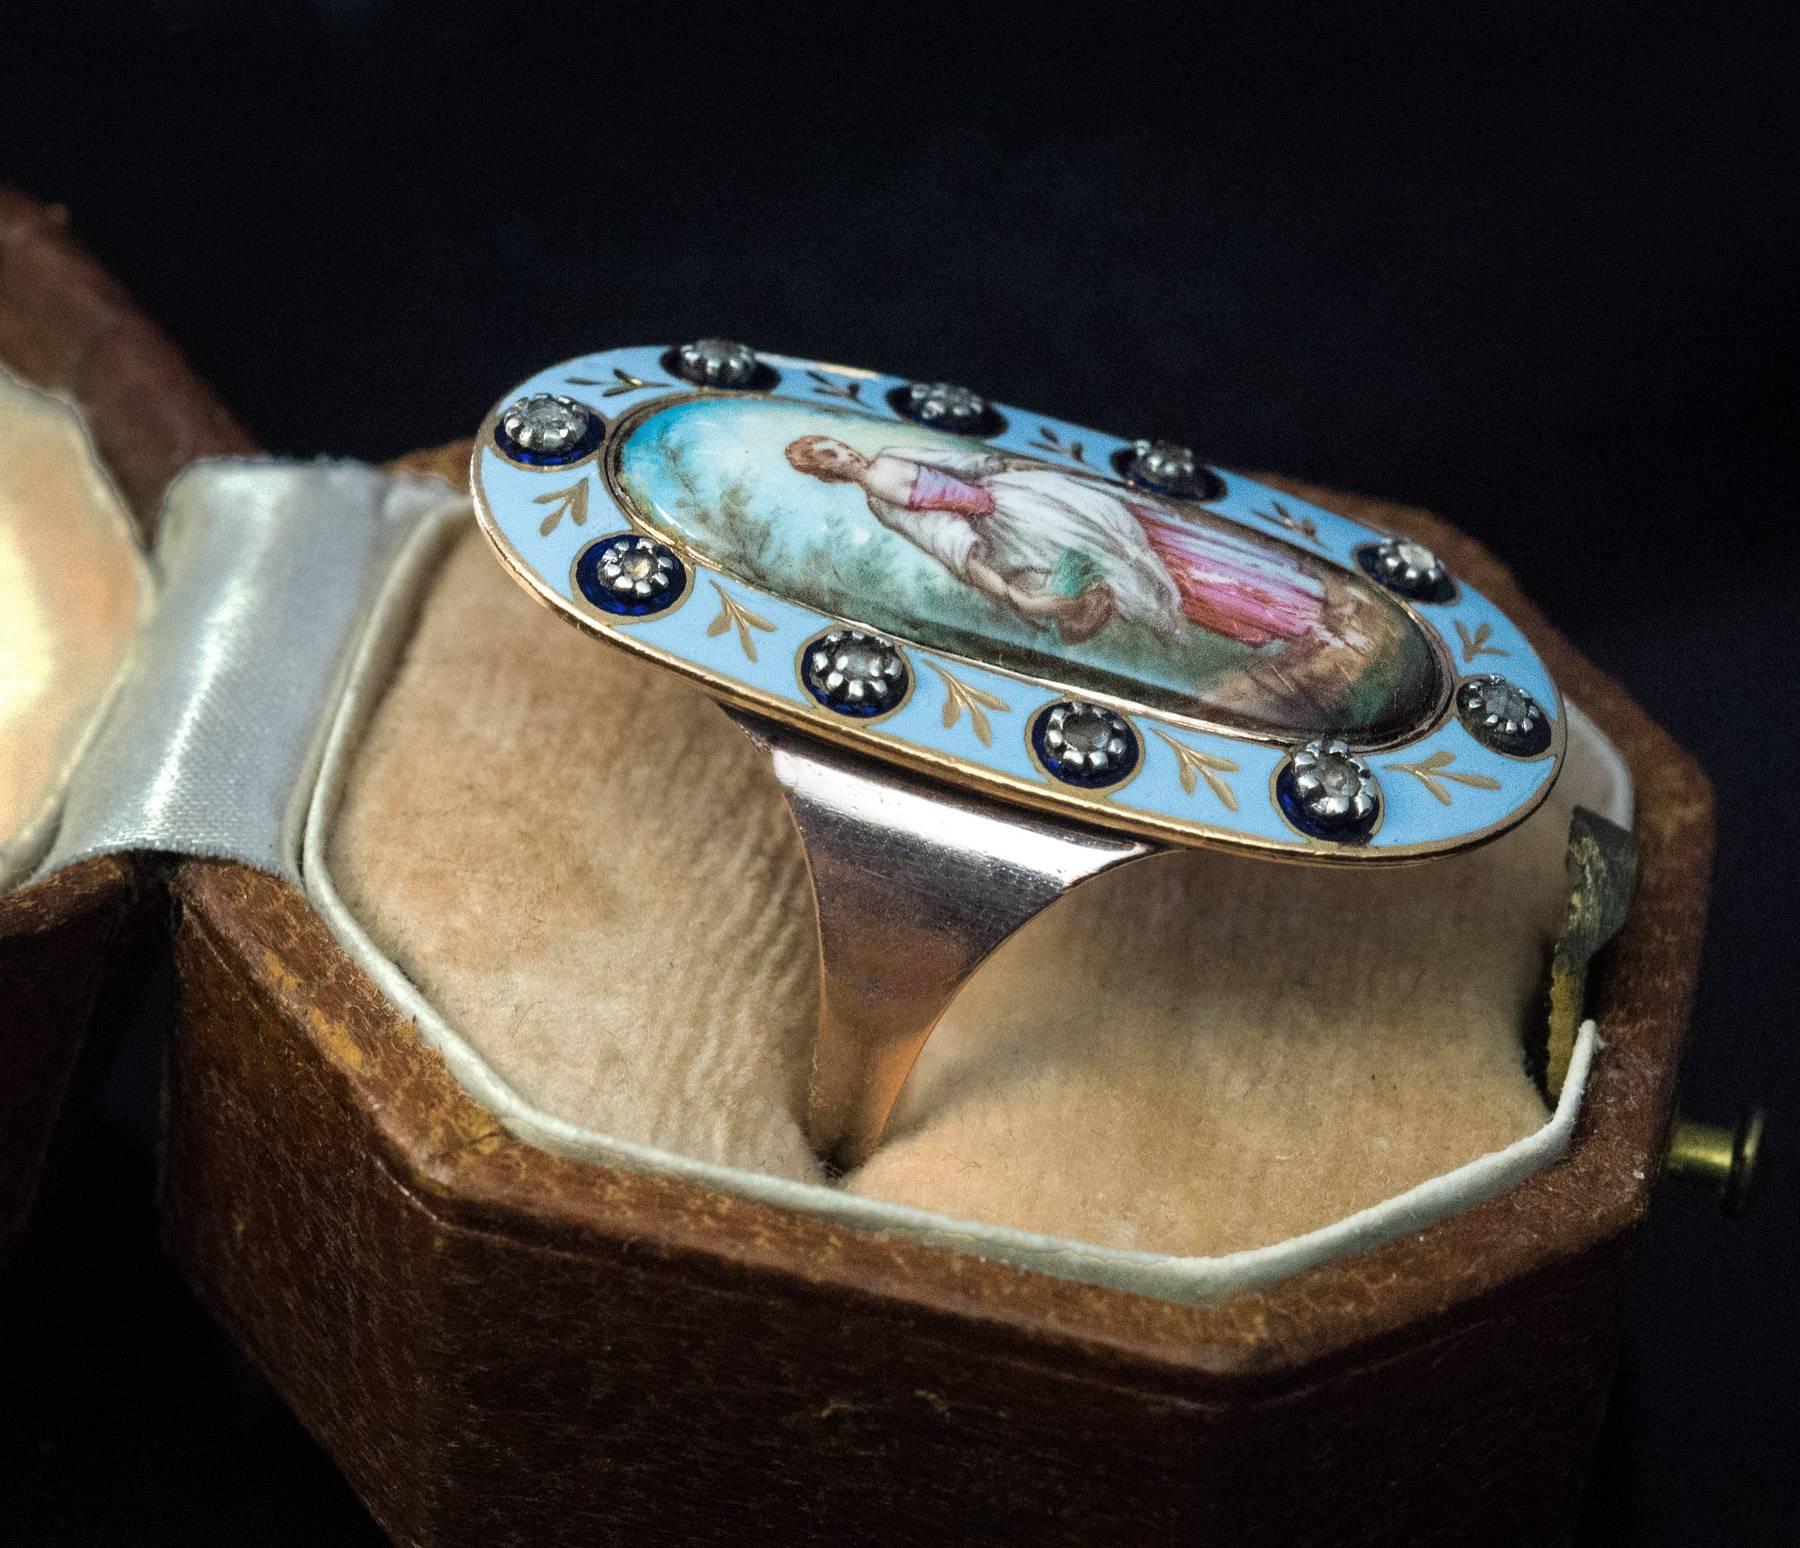 An antique, circa 1790 / 1810, rose 14K gold long ring features a painted enamel pastoral scene (idealized country life) of a peasant girl carrying a basket of greens. The painted enamel miniature is set in a sky blue enamel frame embellished with